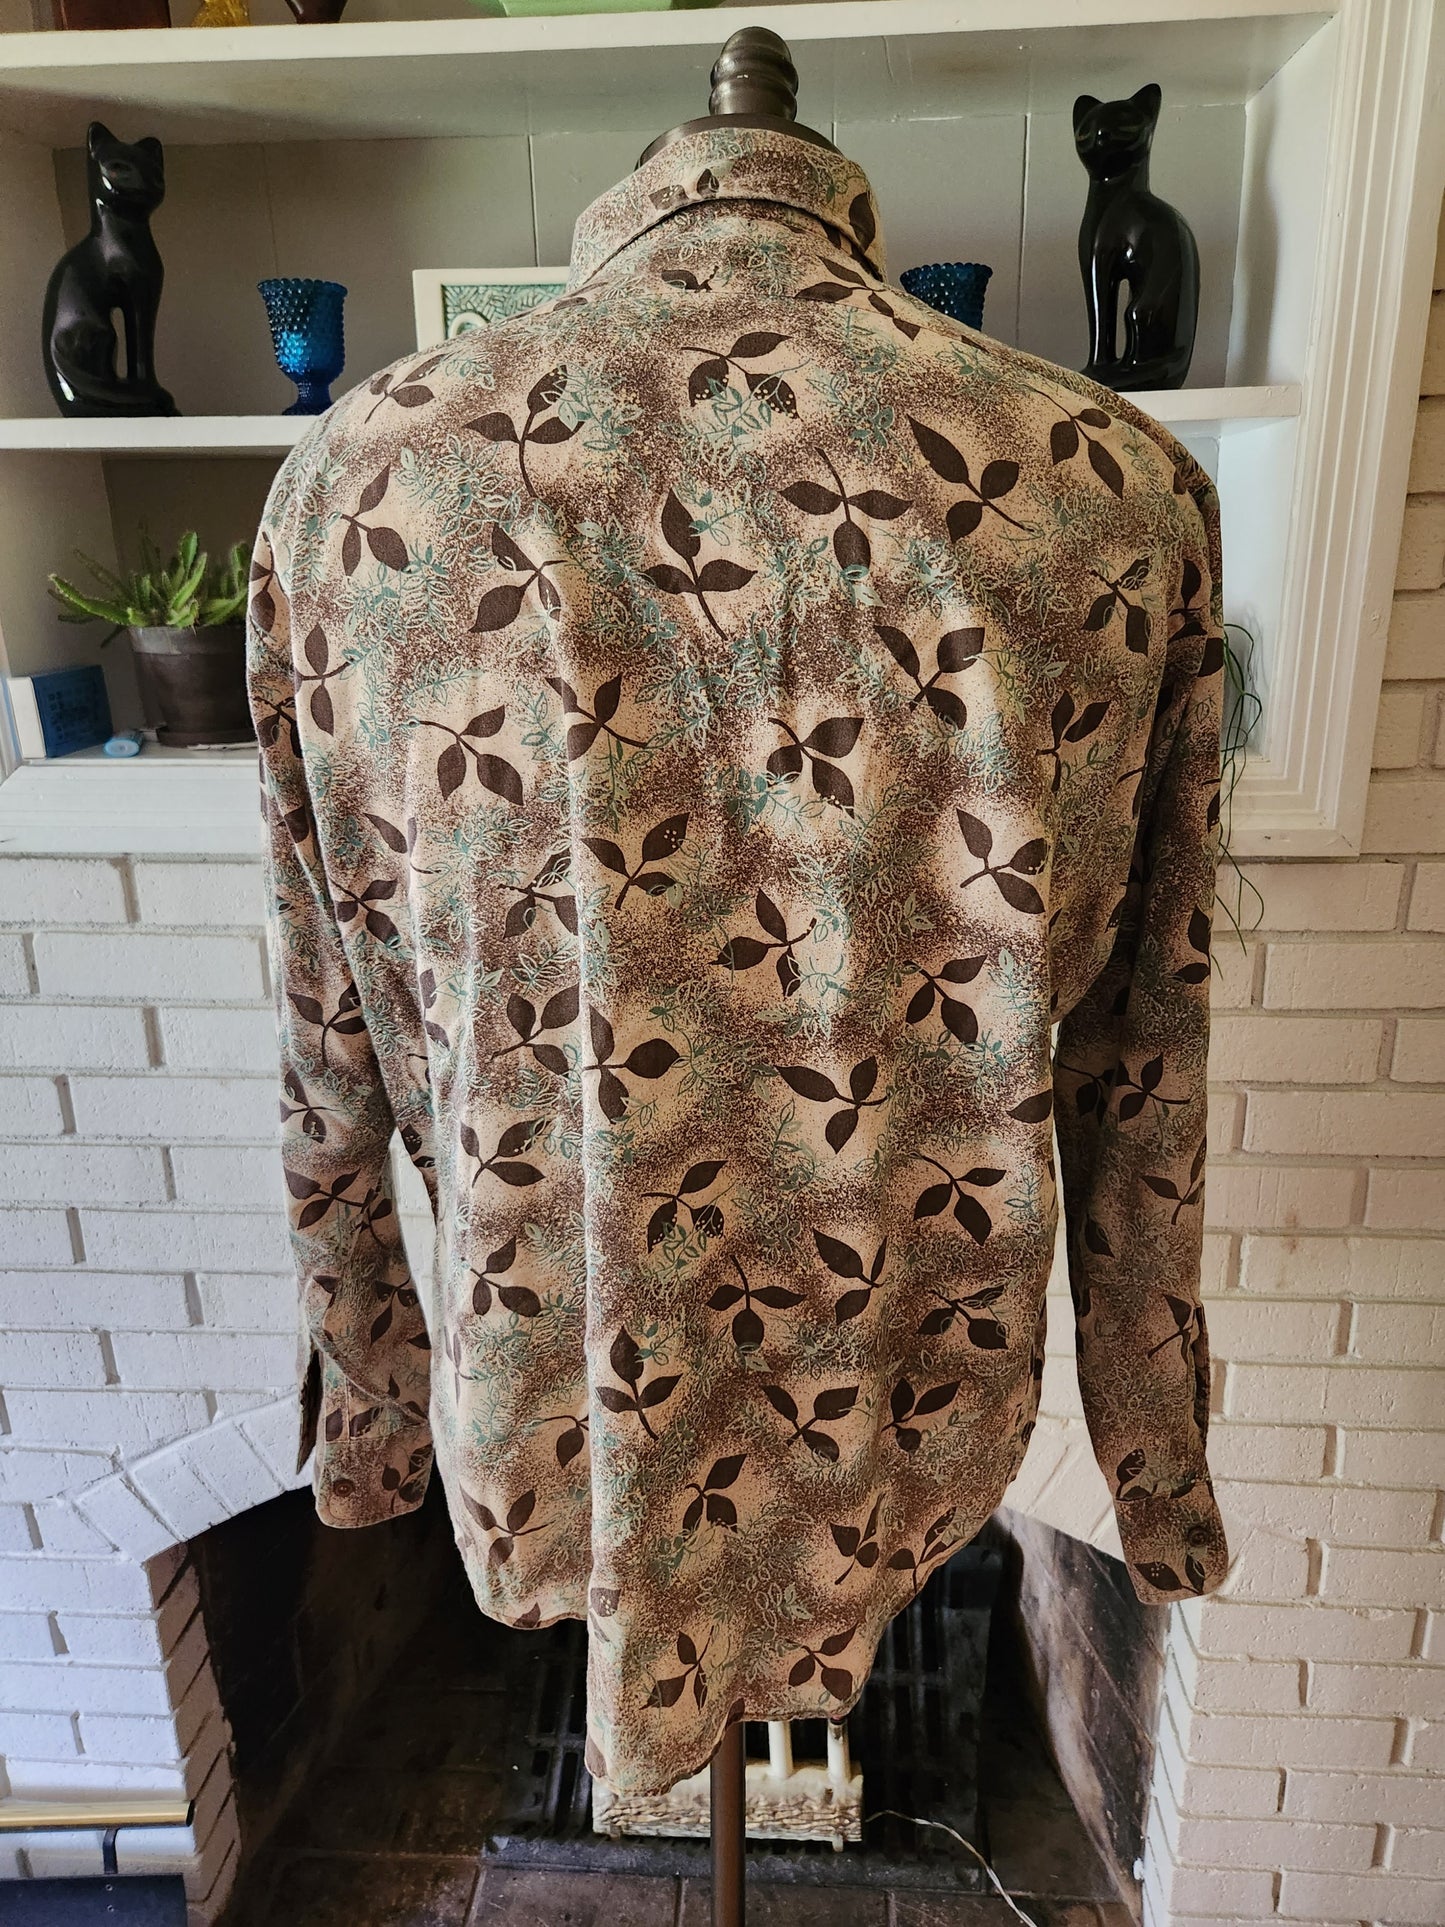 Vintage Long Sleeve Floral Button Down Shirt by Designer